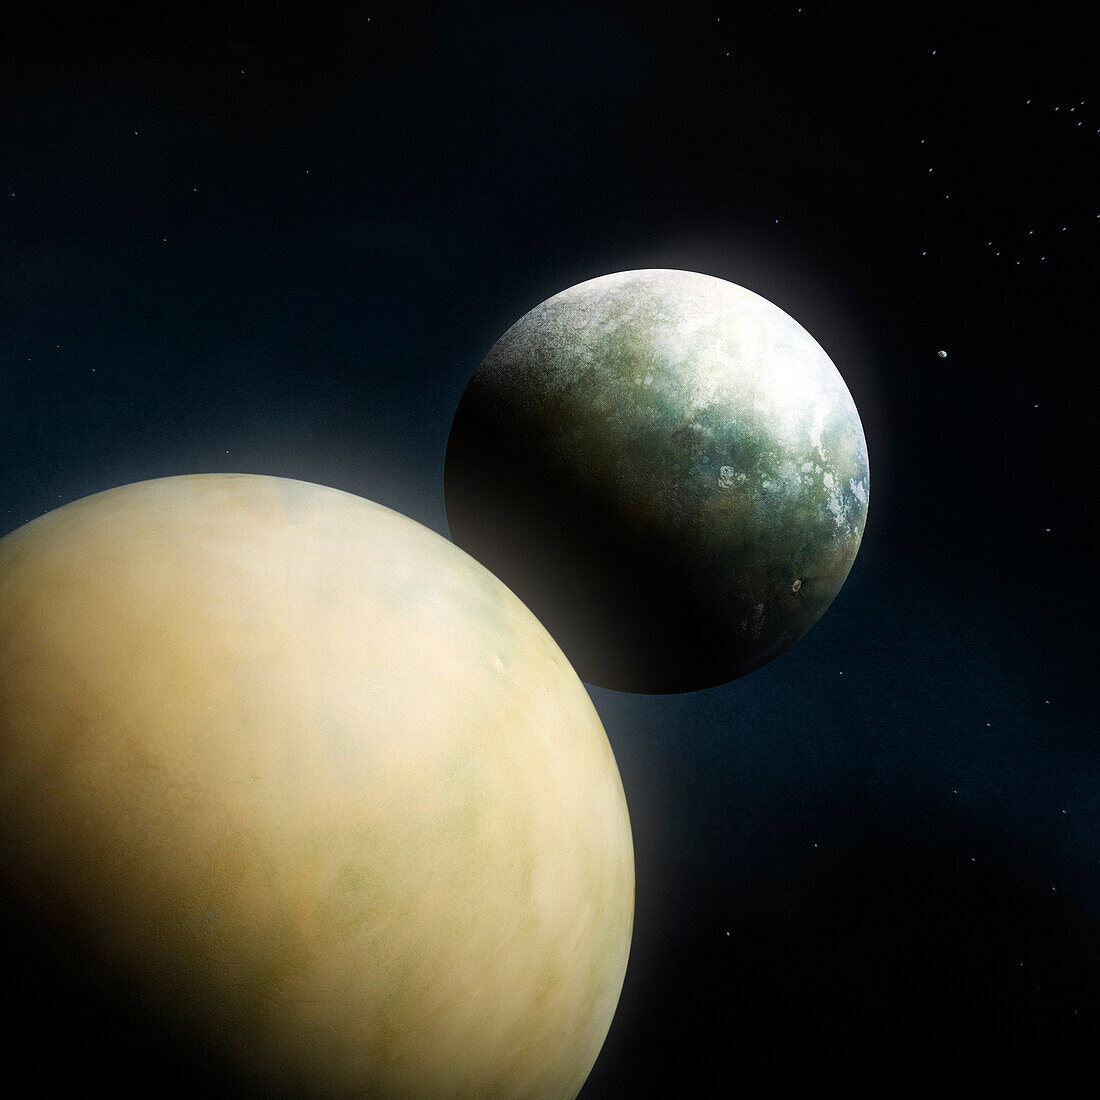 Exoplanets with atmospheres, composite image